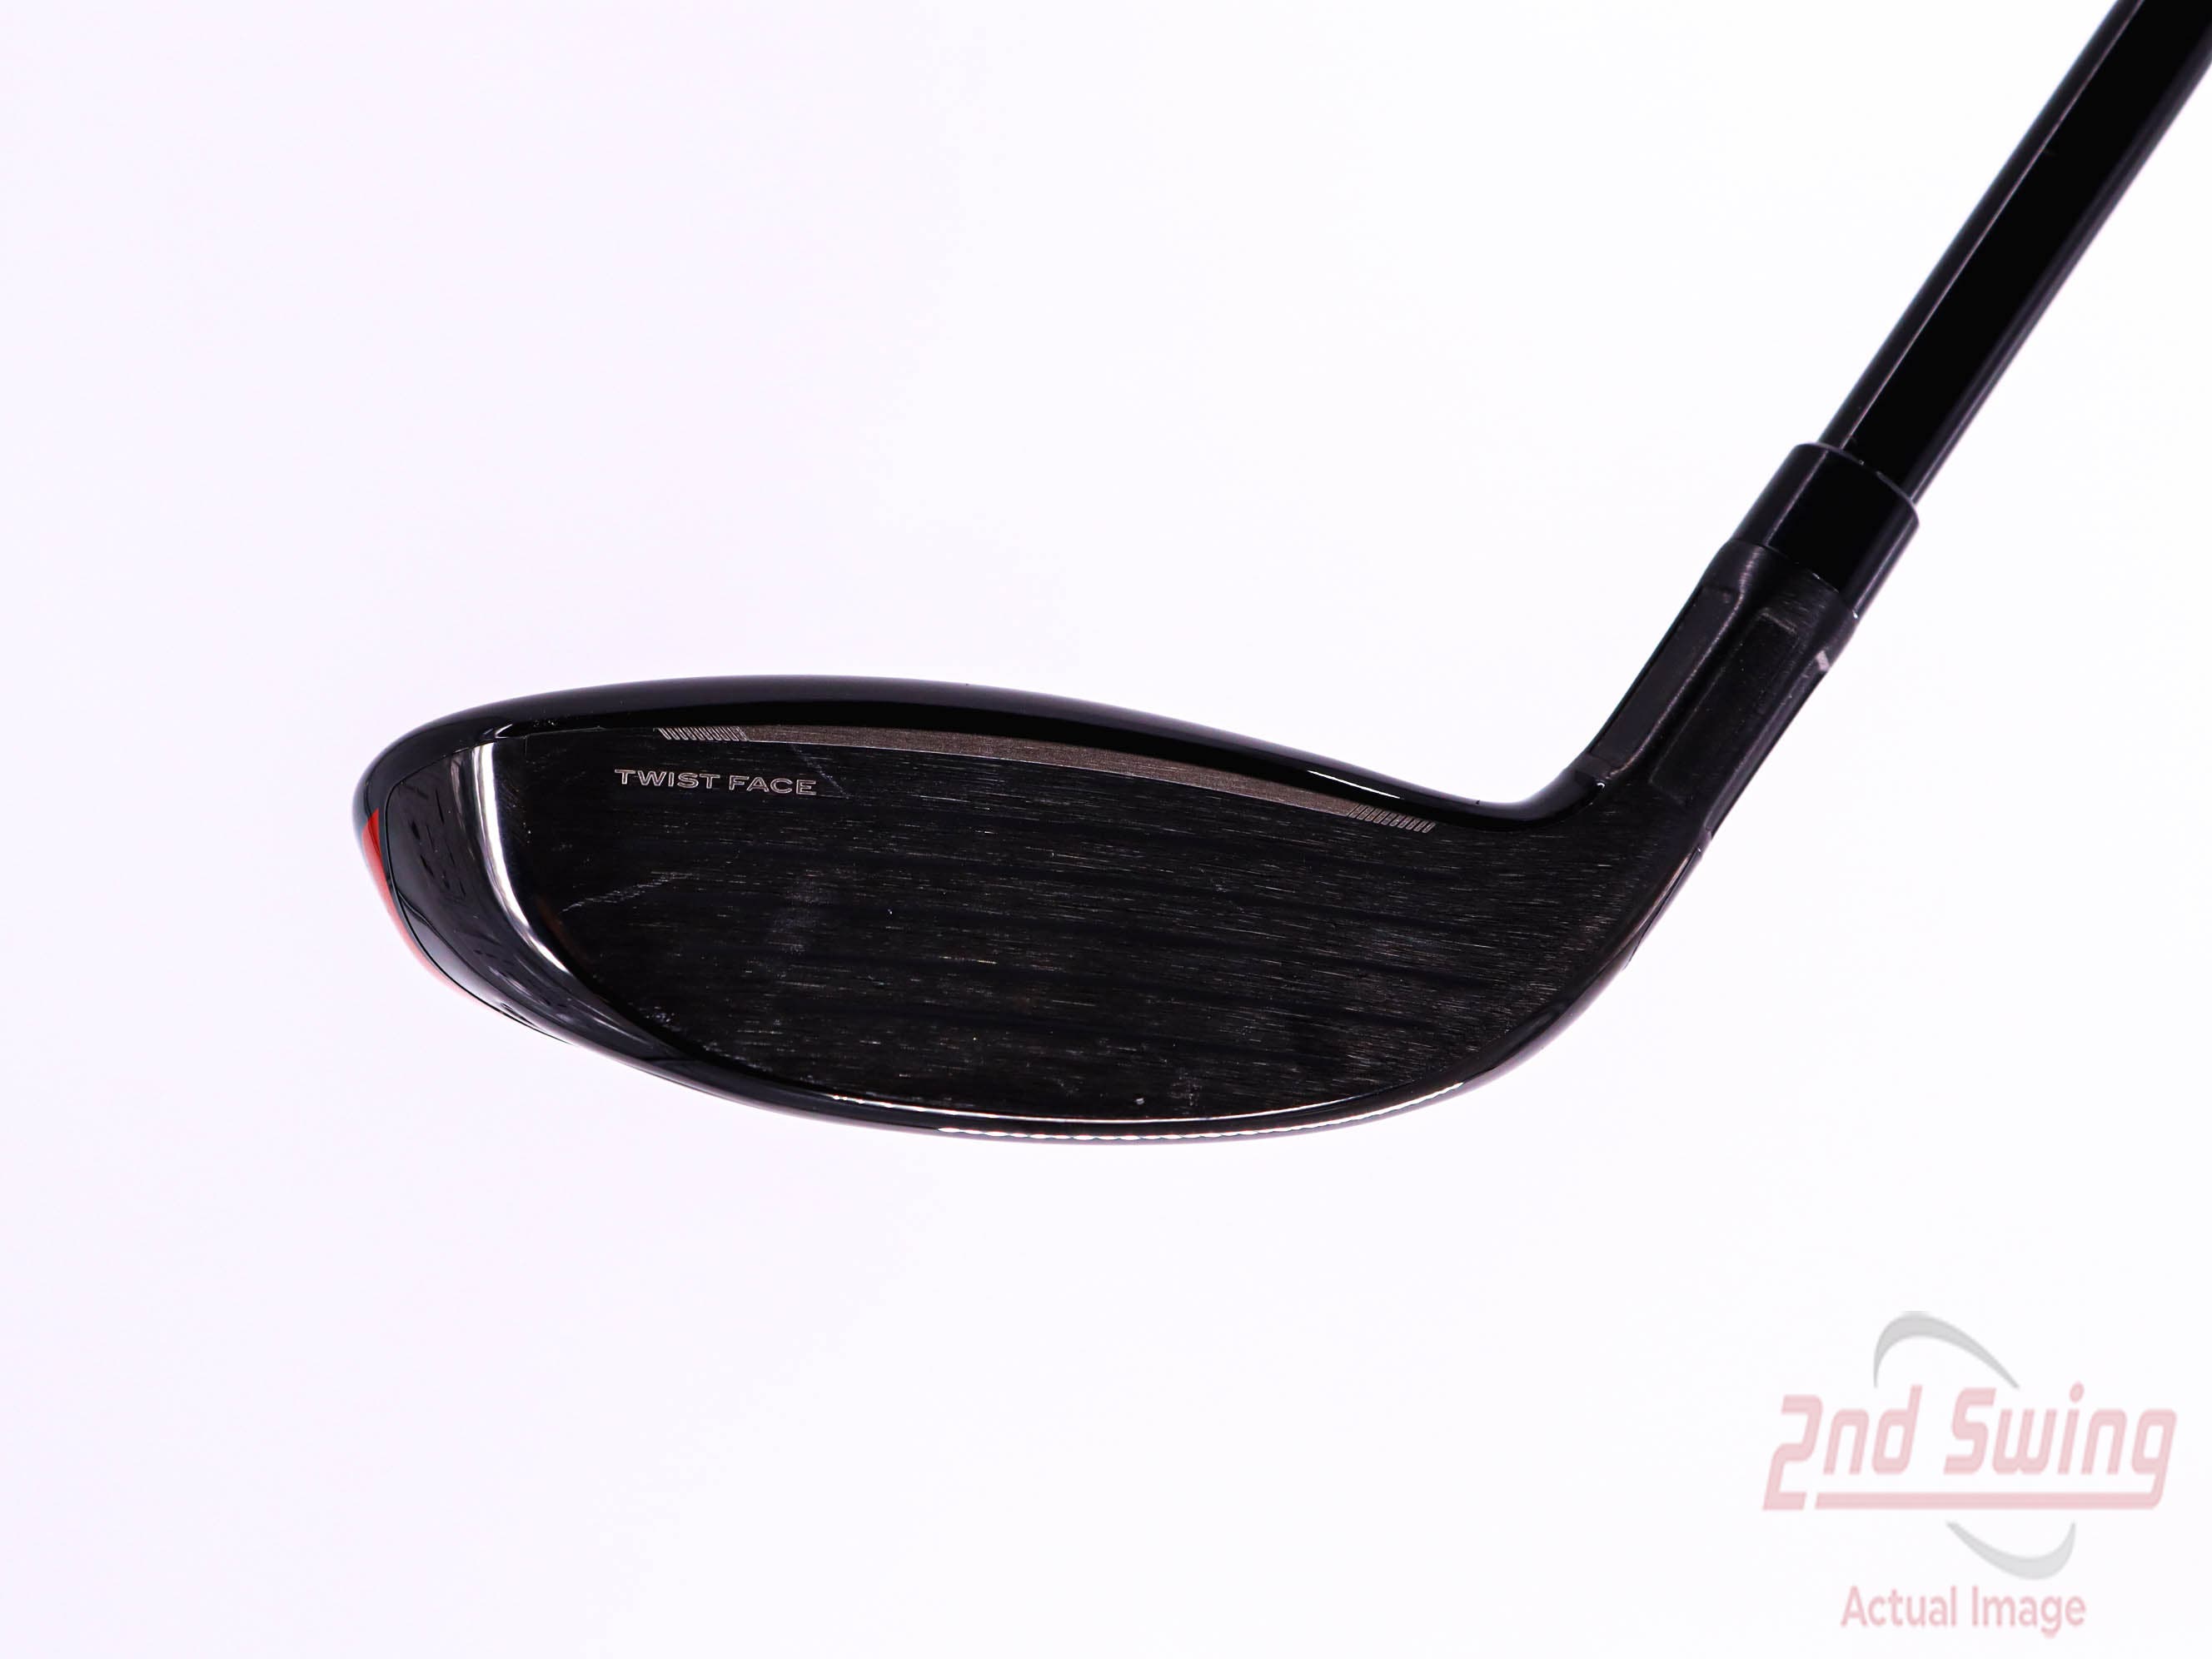 TaylorMade Stealth Rescue Hybrid (D-72332596823) | 2nd Swing Golf